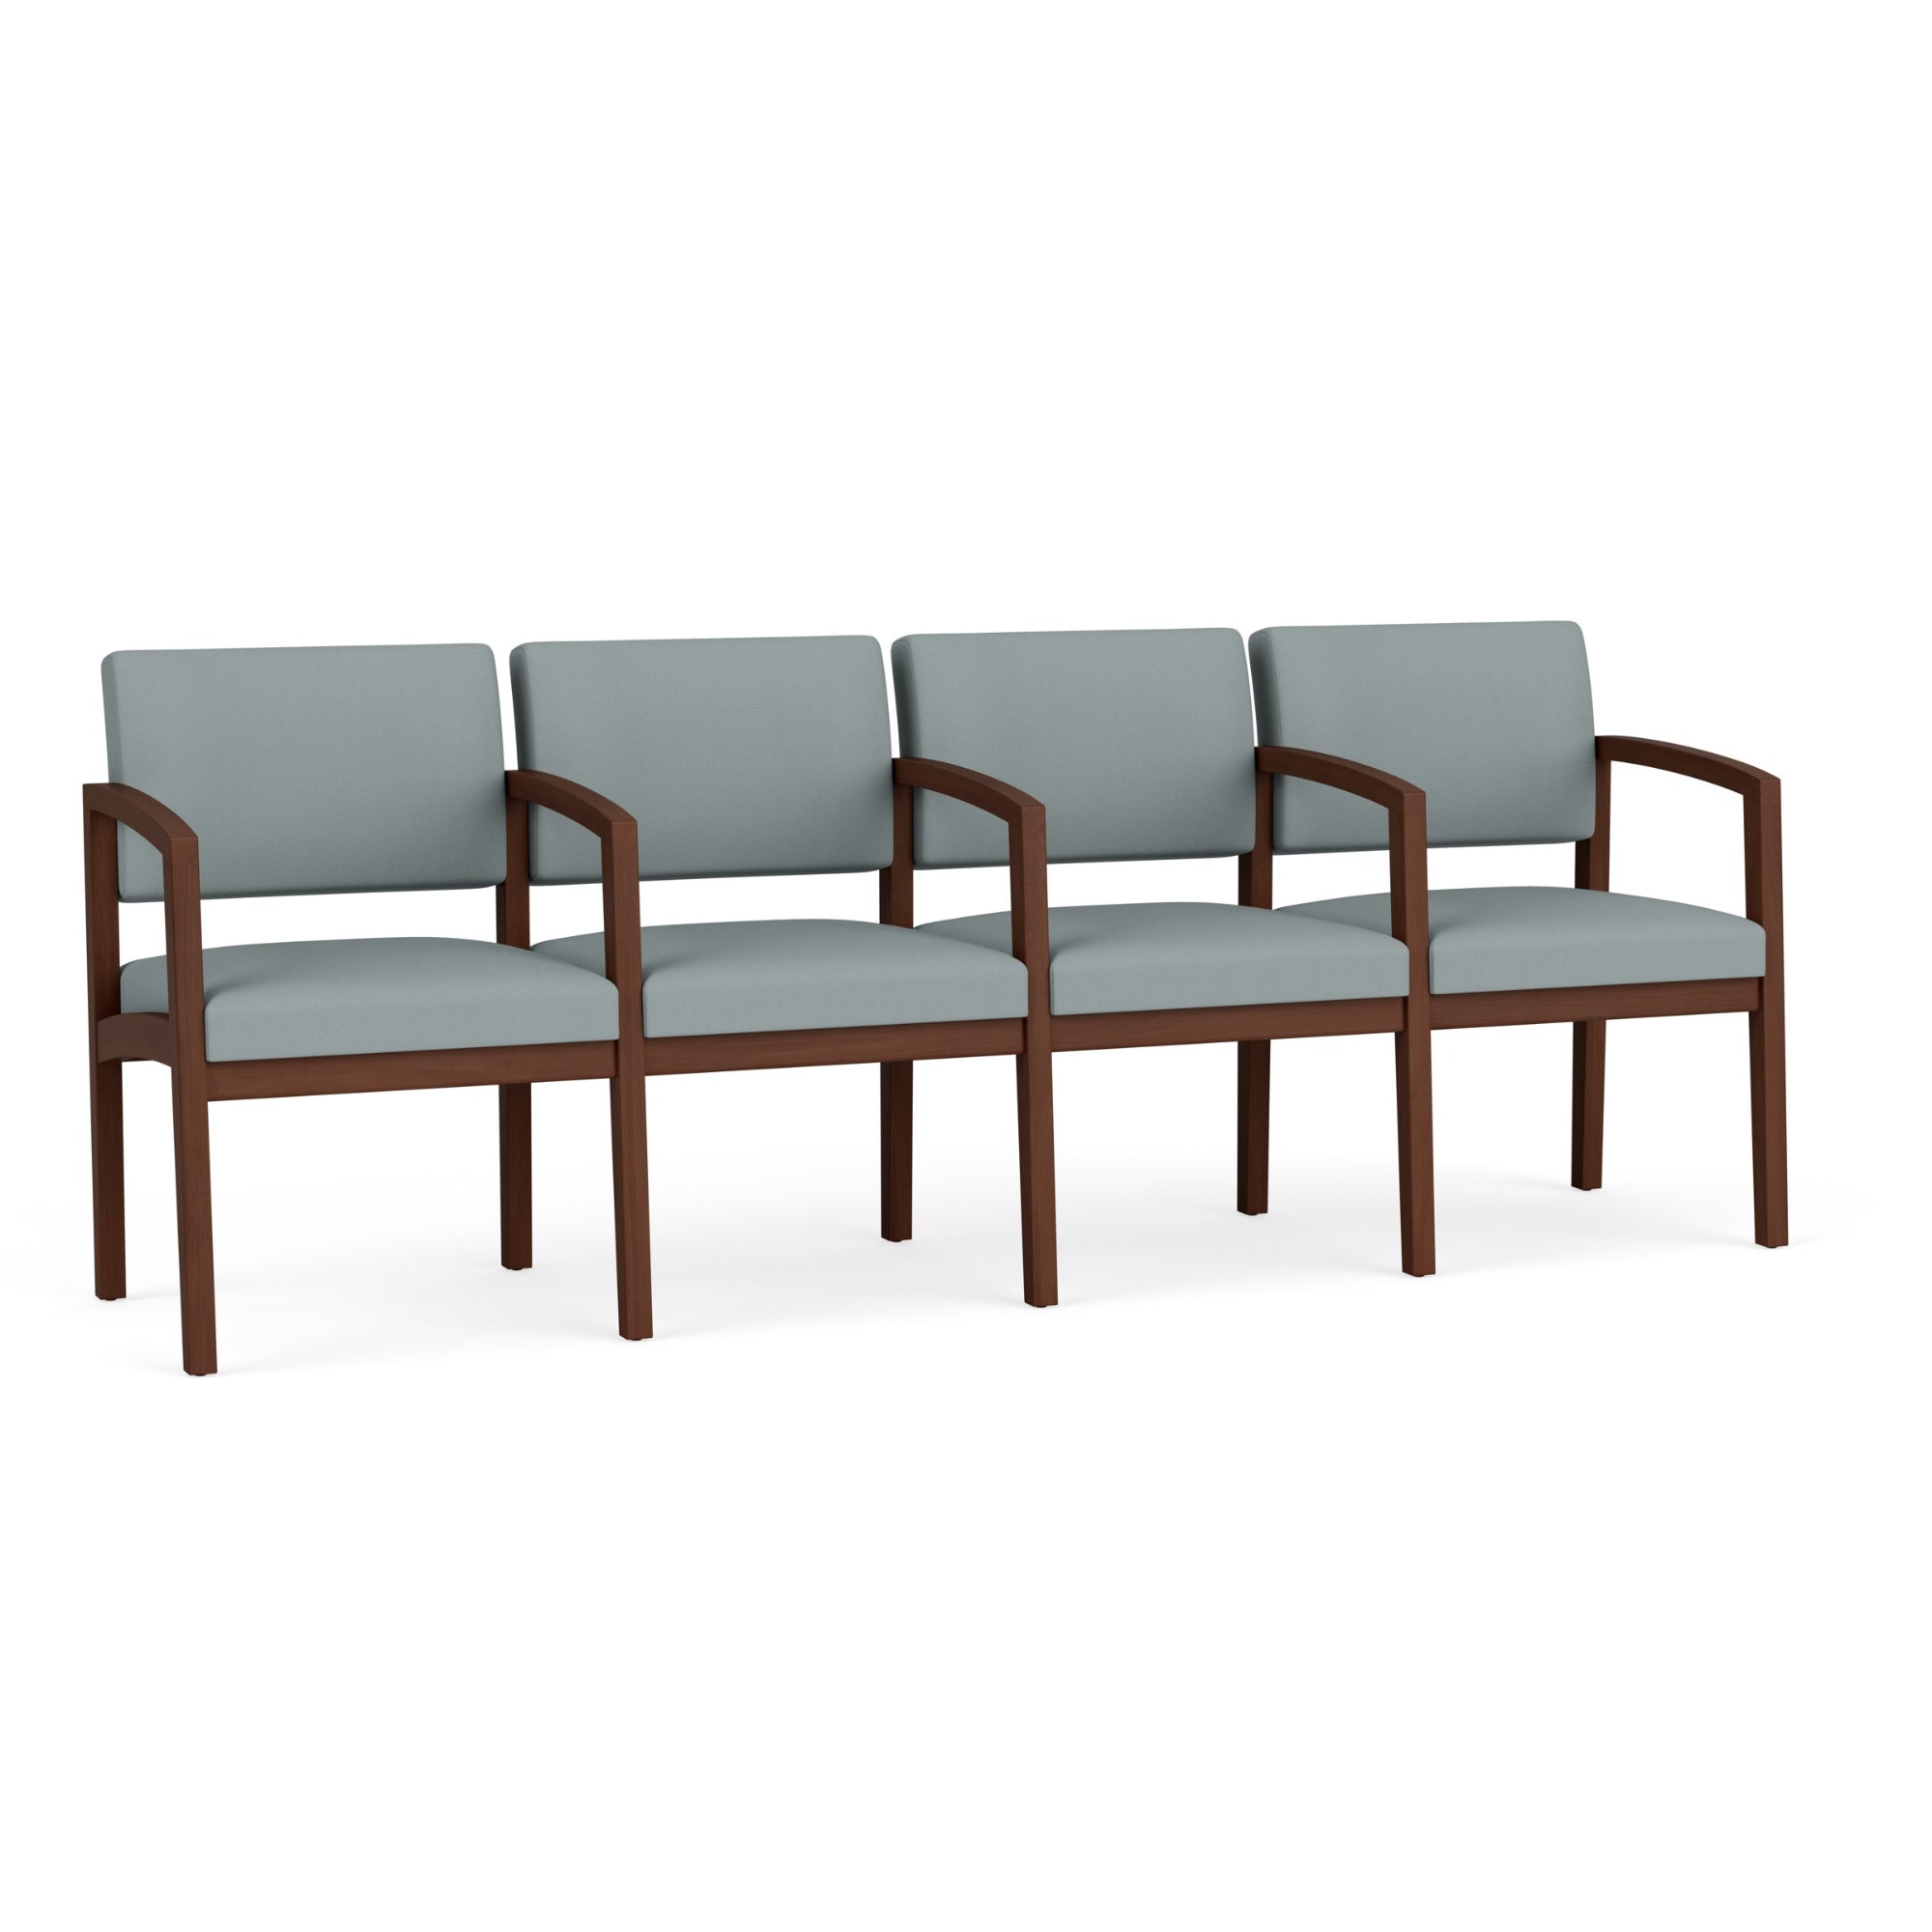 Lenox Wood Collection Reception Seating, 4 Seat Sofa with Center Arms, Standard Vinyl Upholstery, FREE SHIPPING